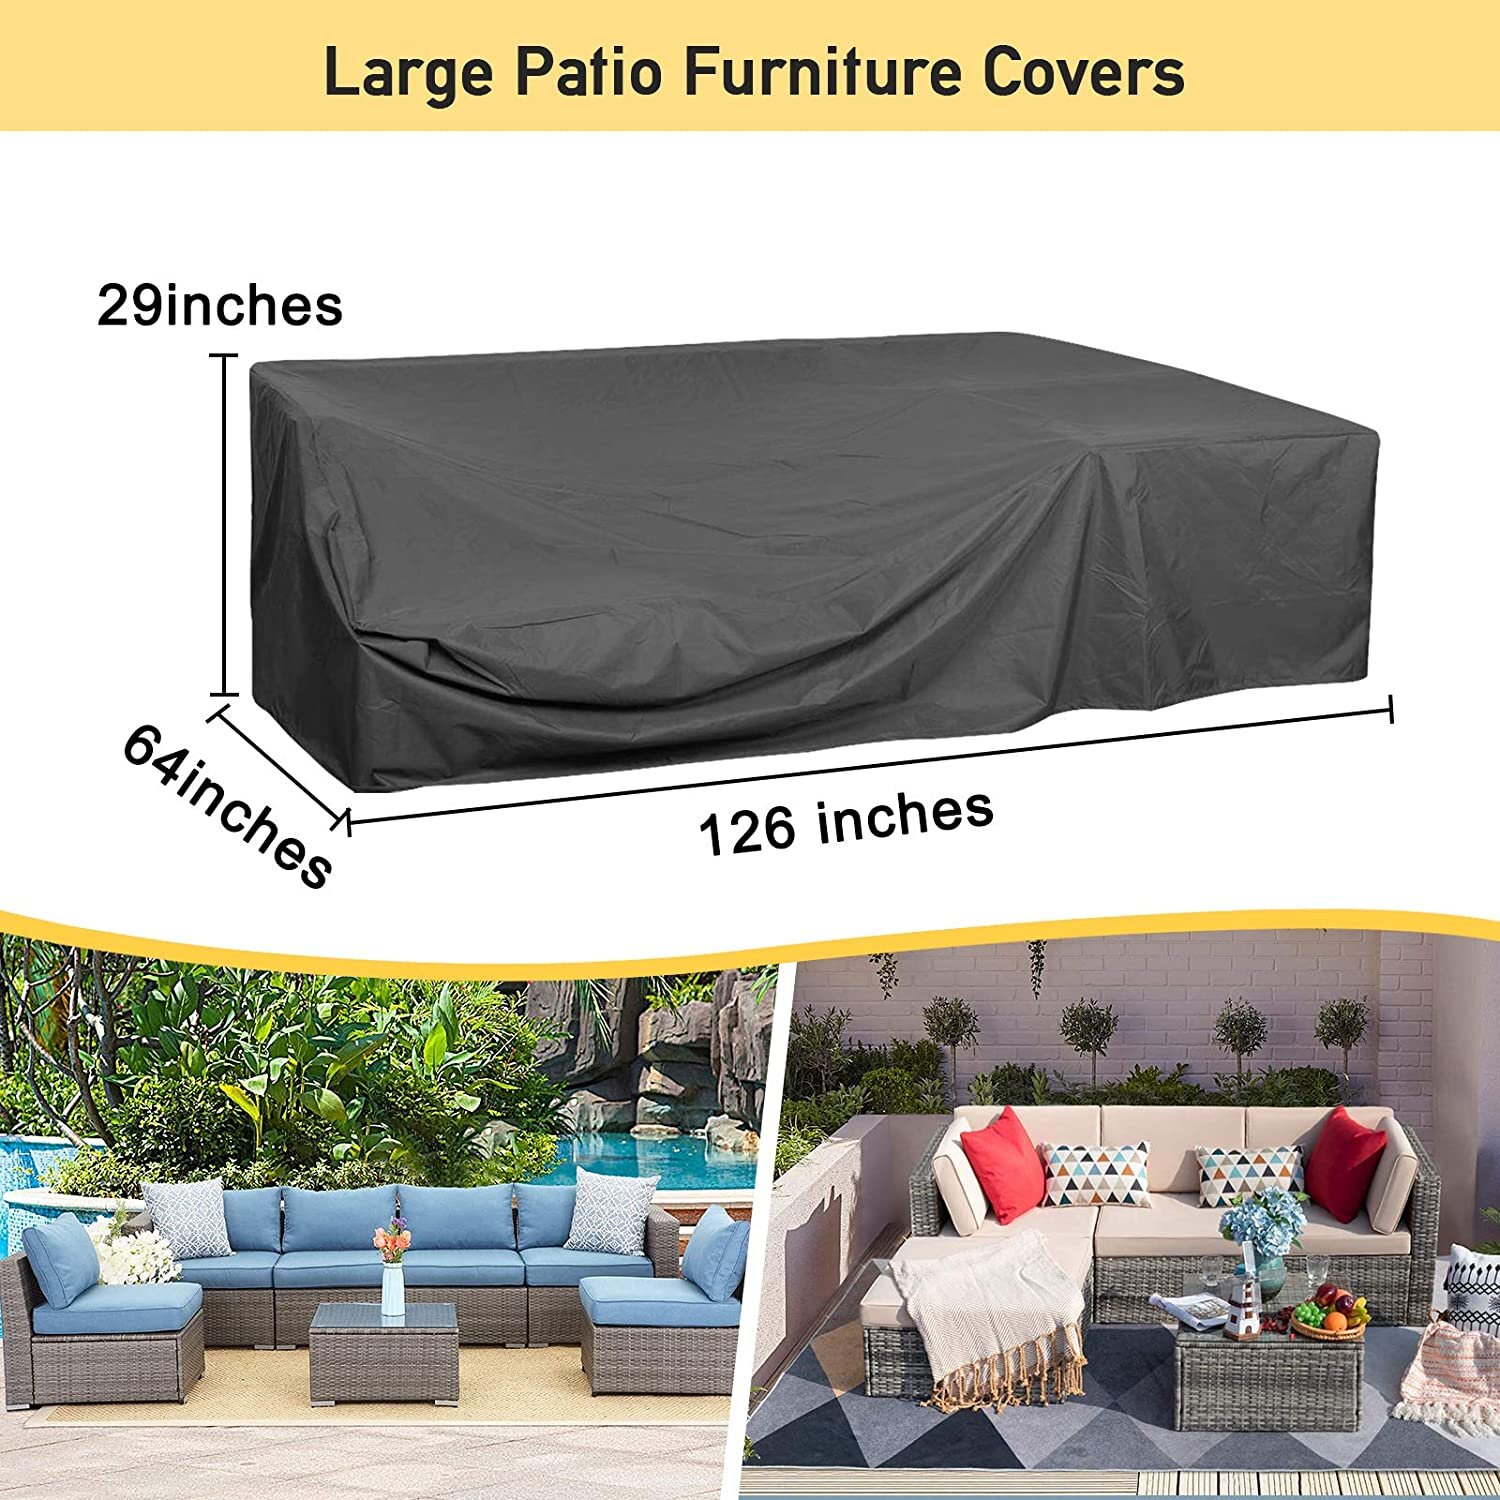 Fade-Resistant 600D Heavy Duty Waterproof Patio Furniture Cover with Air Vents for All Weather Patio Loveseat Covers 76 with BBQ Grill Cover 58 Grey, Black 